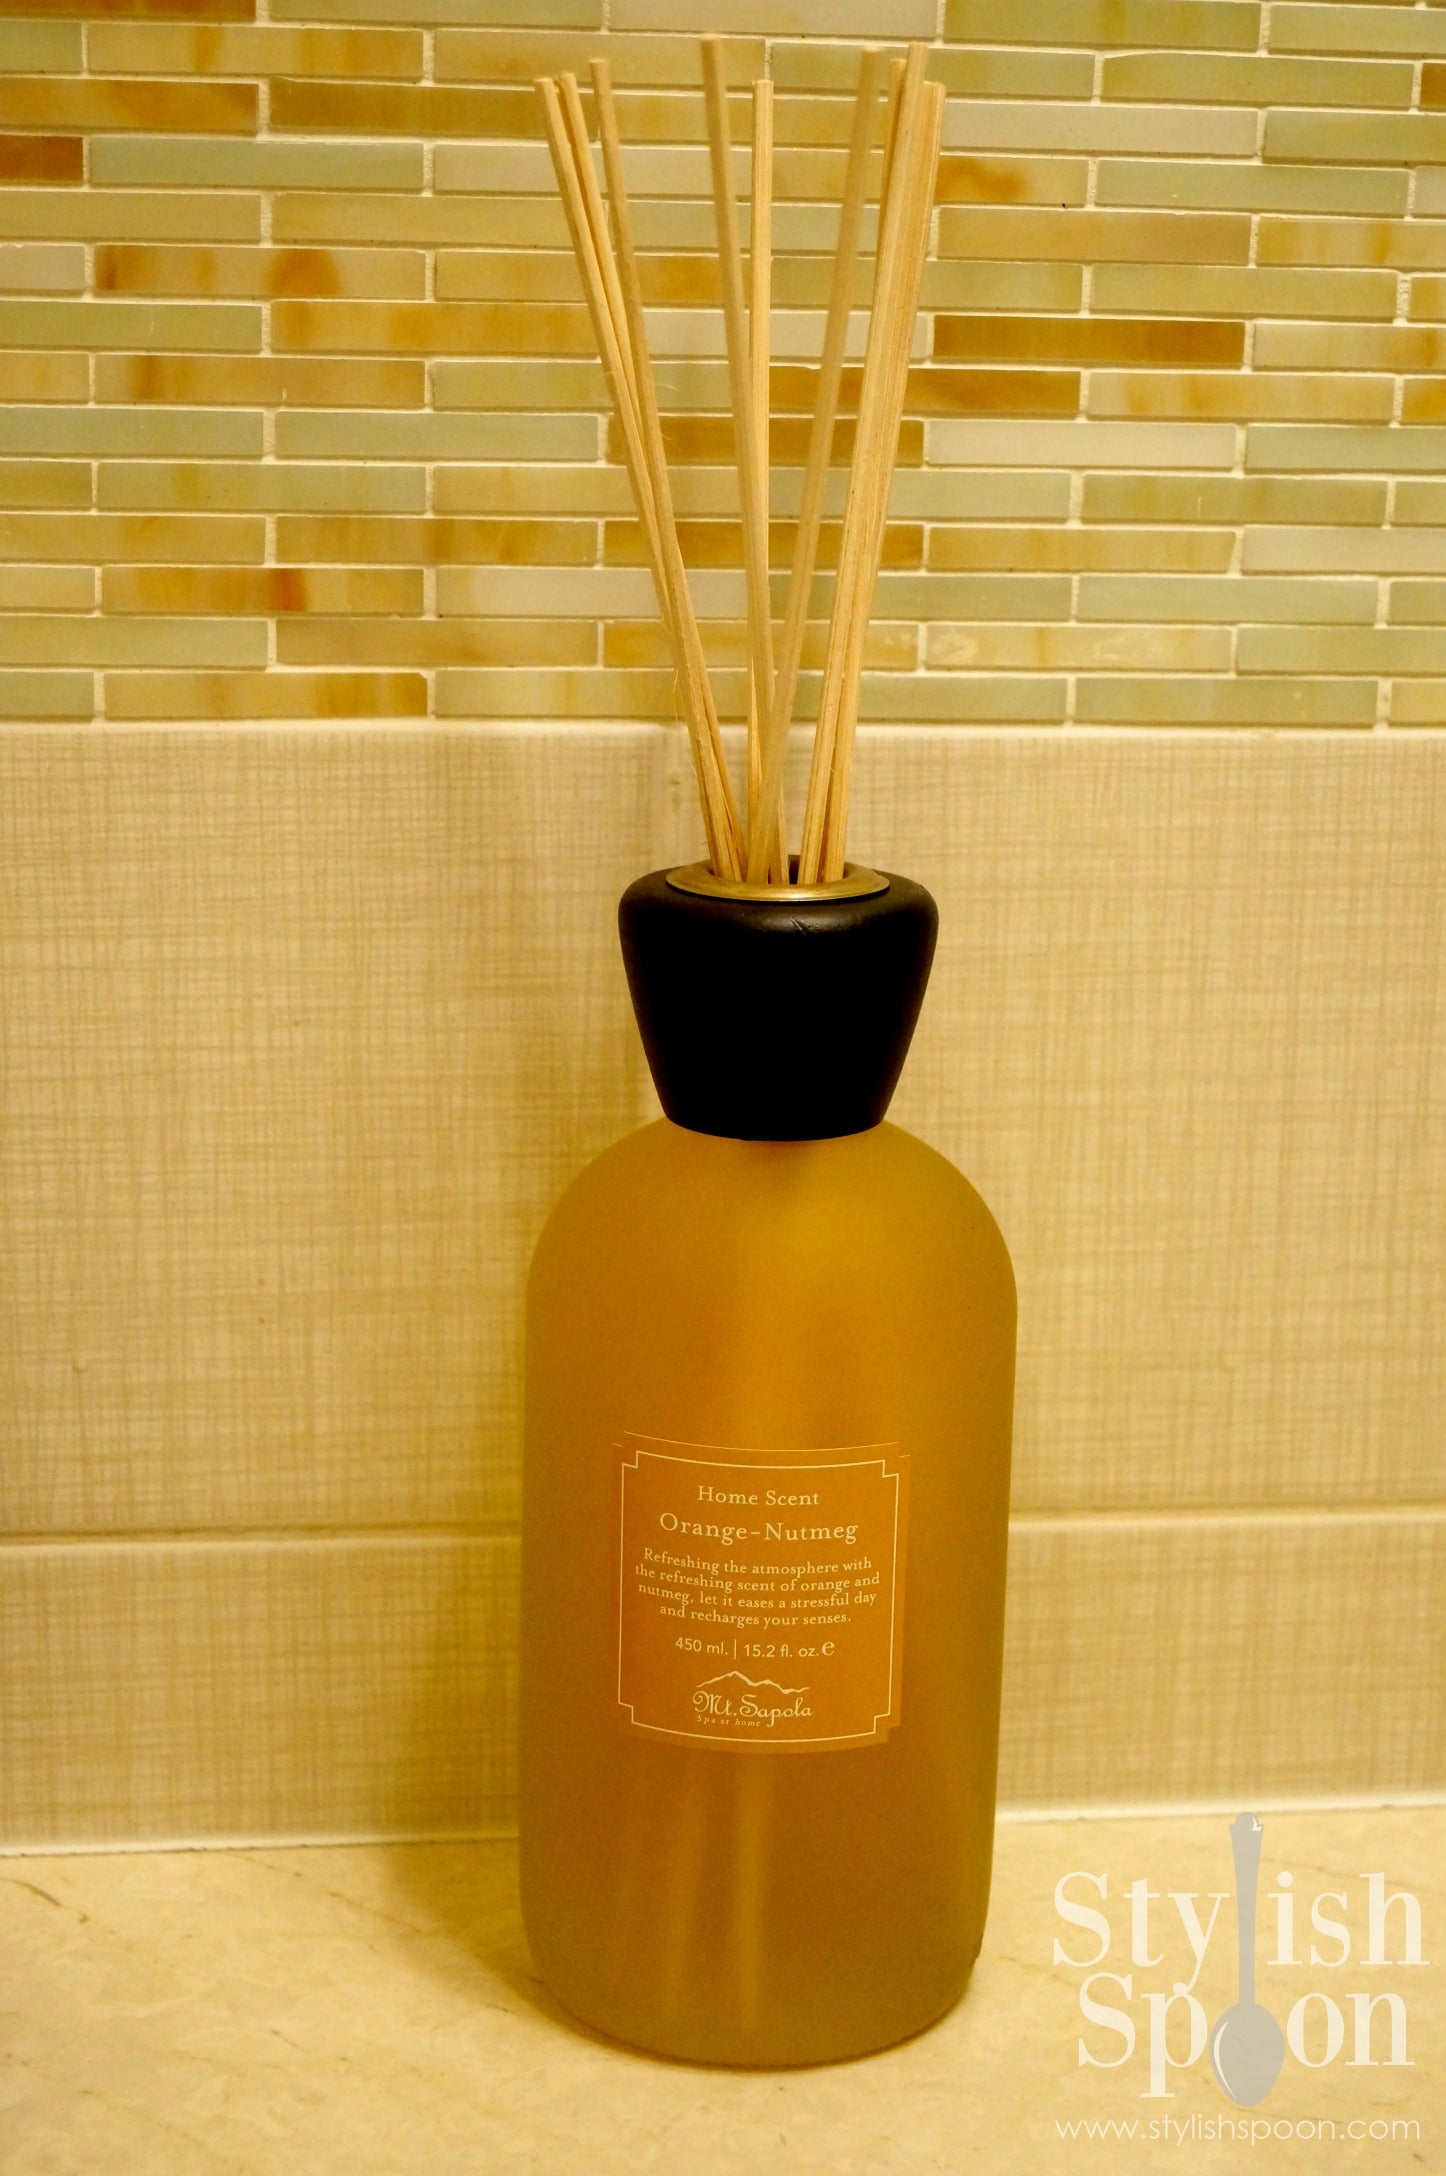 Mt. Sapola Ginger-Nutmeg Winter Reed Diffuser - great hostess gift for the holidays - Stylish Spoon 2013 Holiday Gift Guide